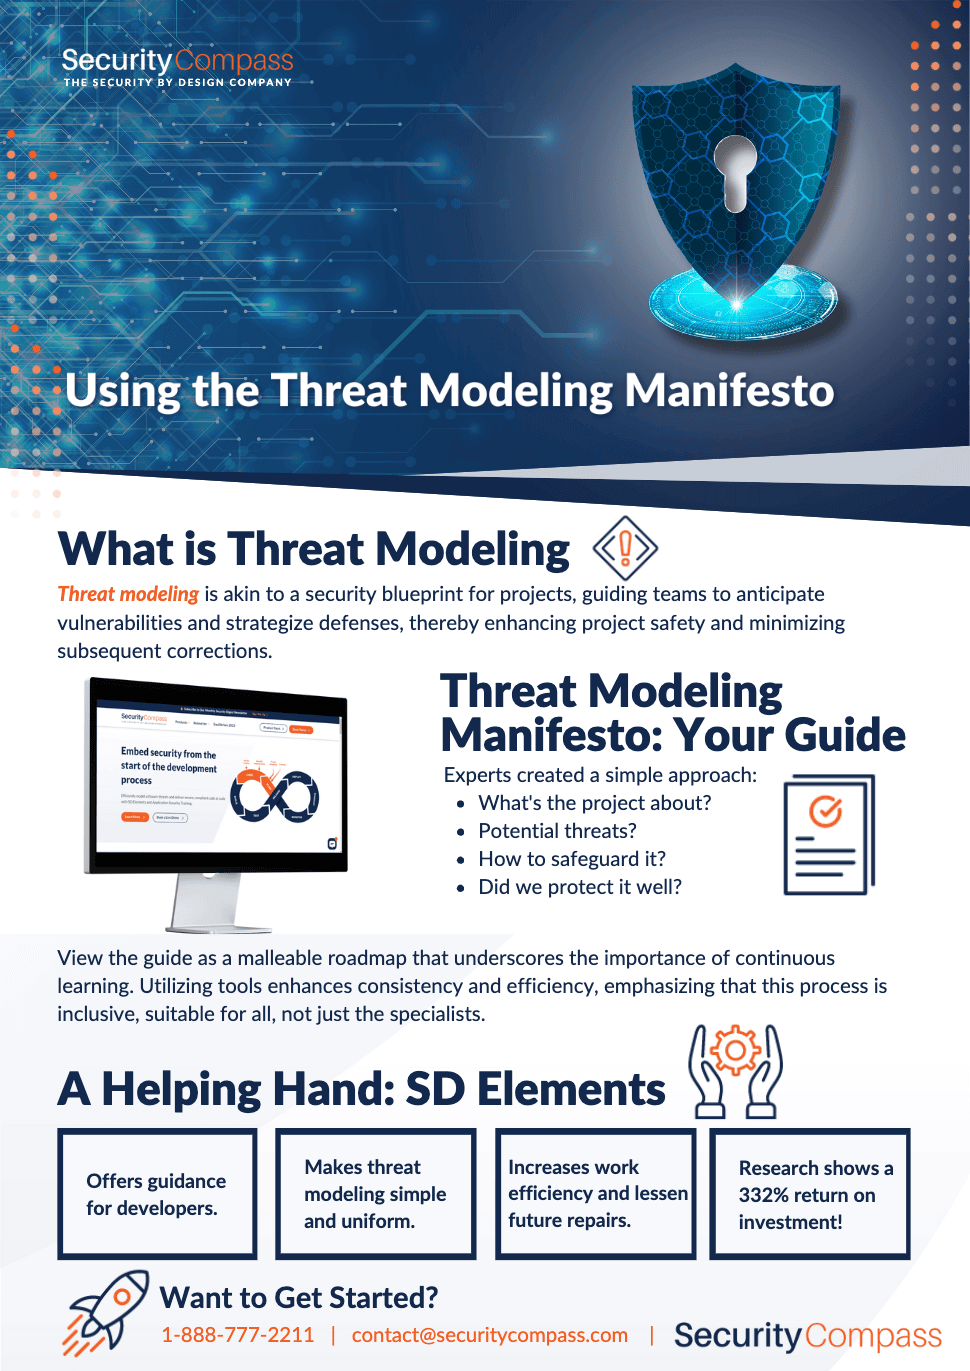 An infographic that shows how Use the Threat Modeling Manifesto